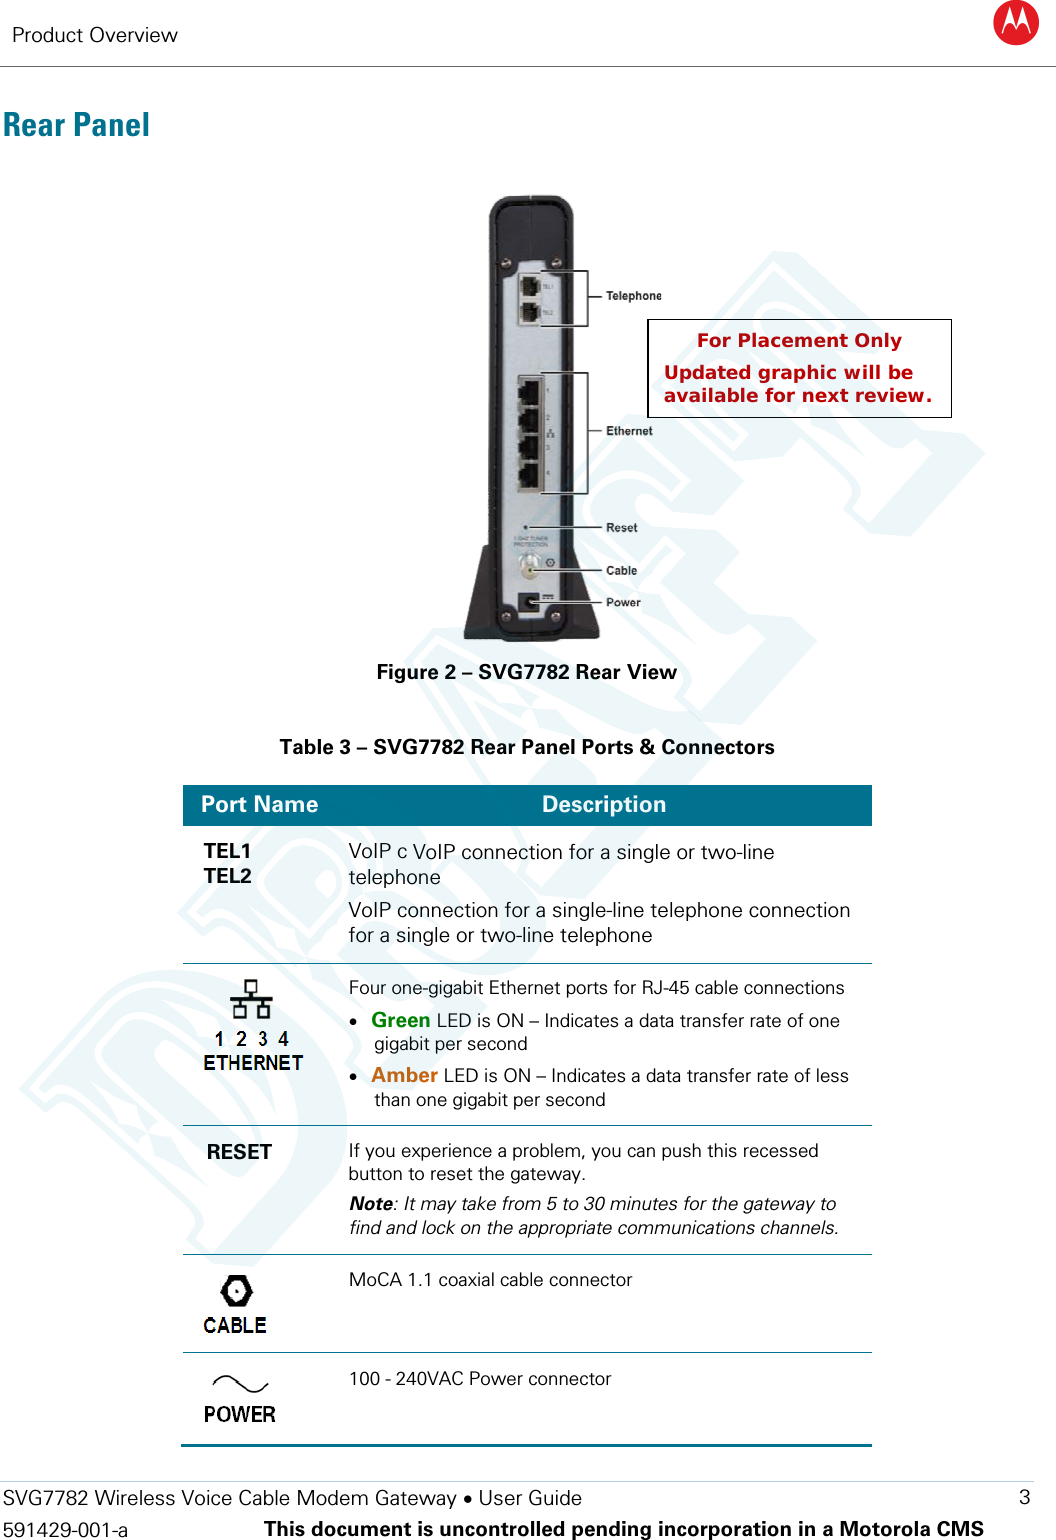 Product Overview B  SVG7782 Wireless Voice Cable Modem Gateway • User Guide 3 591429-001-a This document is uncontrolled pending incorporation in a Motorola CMS  Rear Panel  Figure 2 – SVG7782 Rear View  Table 3 – SVG7782 Rear Panel Ports &amp; Connectors Port Name Description TEL1 TEL2 VoIP c VoIP connection for a single or two-line telephone VoIP connection for a single-line telephone connection for a single or two-line telephone  Four one-gigabit Ethernet ports for RJ-45 cable connections • Green LED is ON – Indicates a data transfer rate of one gigabit per second • Amber LED is ON – Indicates a data transfer rate of less than one gigabit per second RESET If you experience a problem, you can push this recessed button to reset the gateway. Note: It may take from 5 to 30 minutes for the gateway to find and lock on the appropriate communications channels.  MoCA 1.1 coaxial cable connector  100 - 240VAC Power connector For Placement Only  Updated graphic will be available for next review. DRAFT